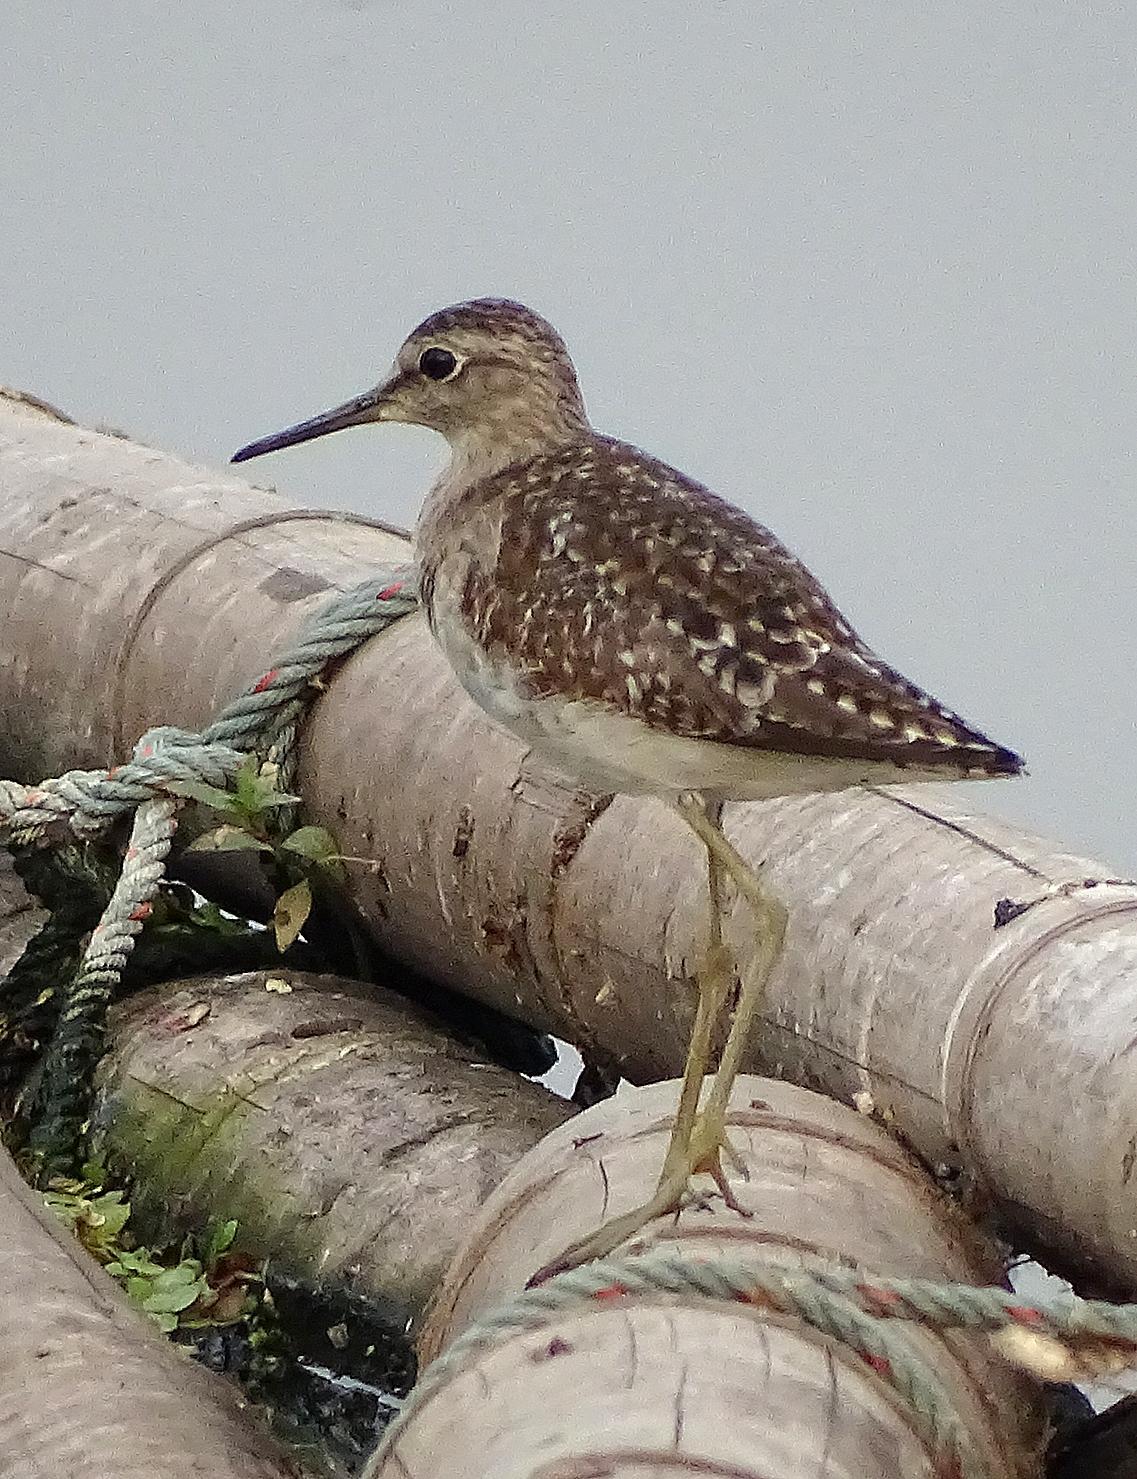 Wood Sandpiper Photo by Robert Behrstock